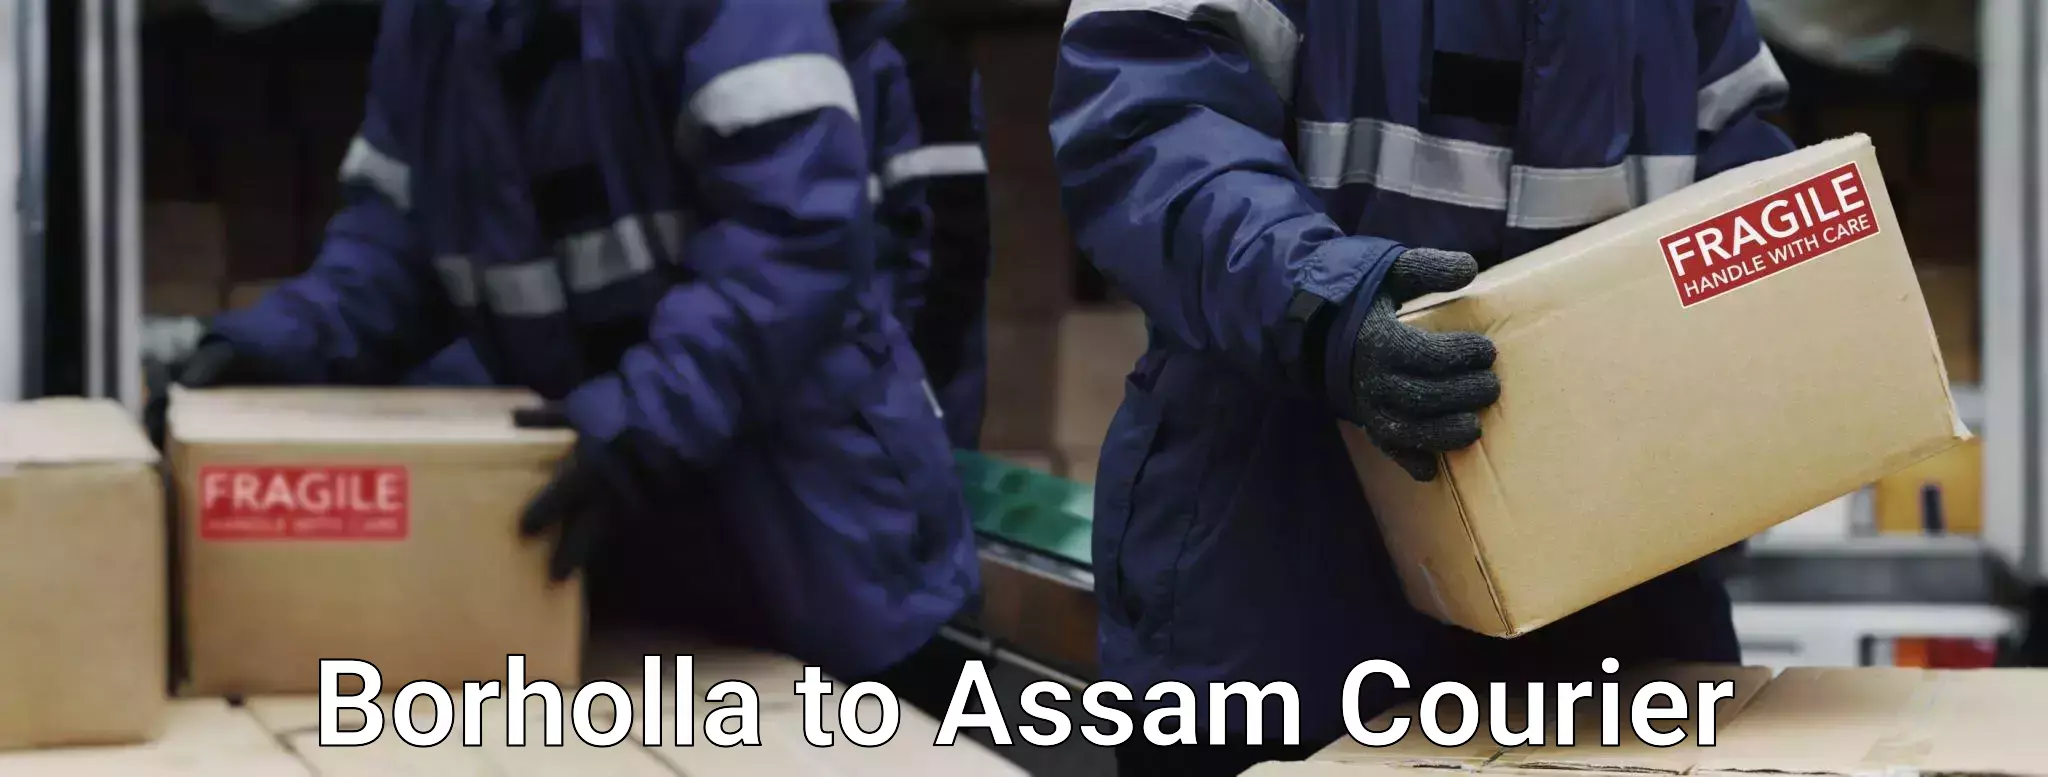 Baggage delivery support Borholla to Lala Assam